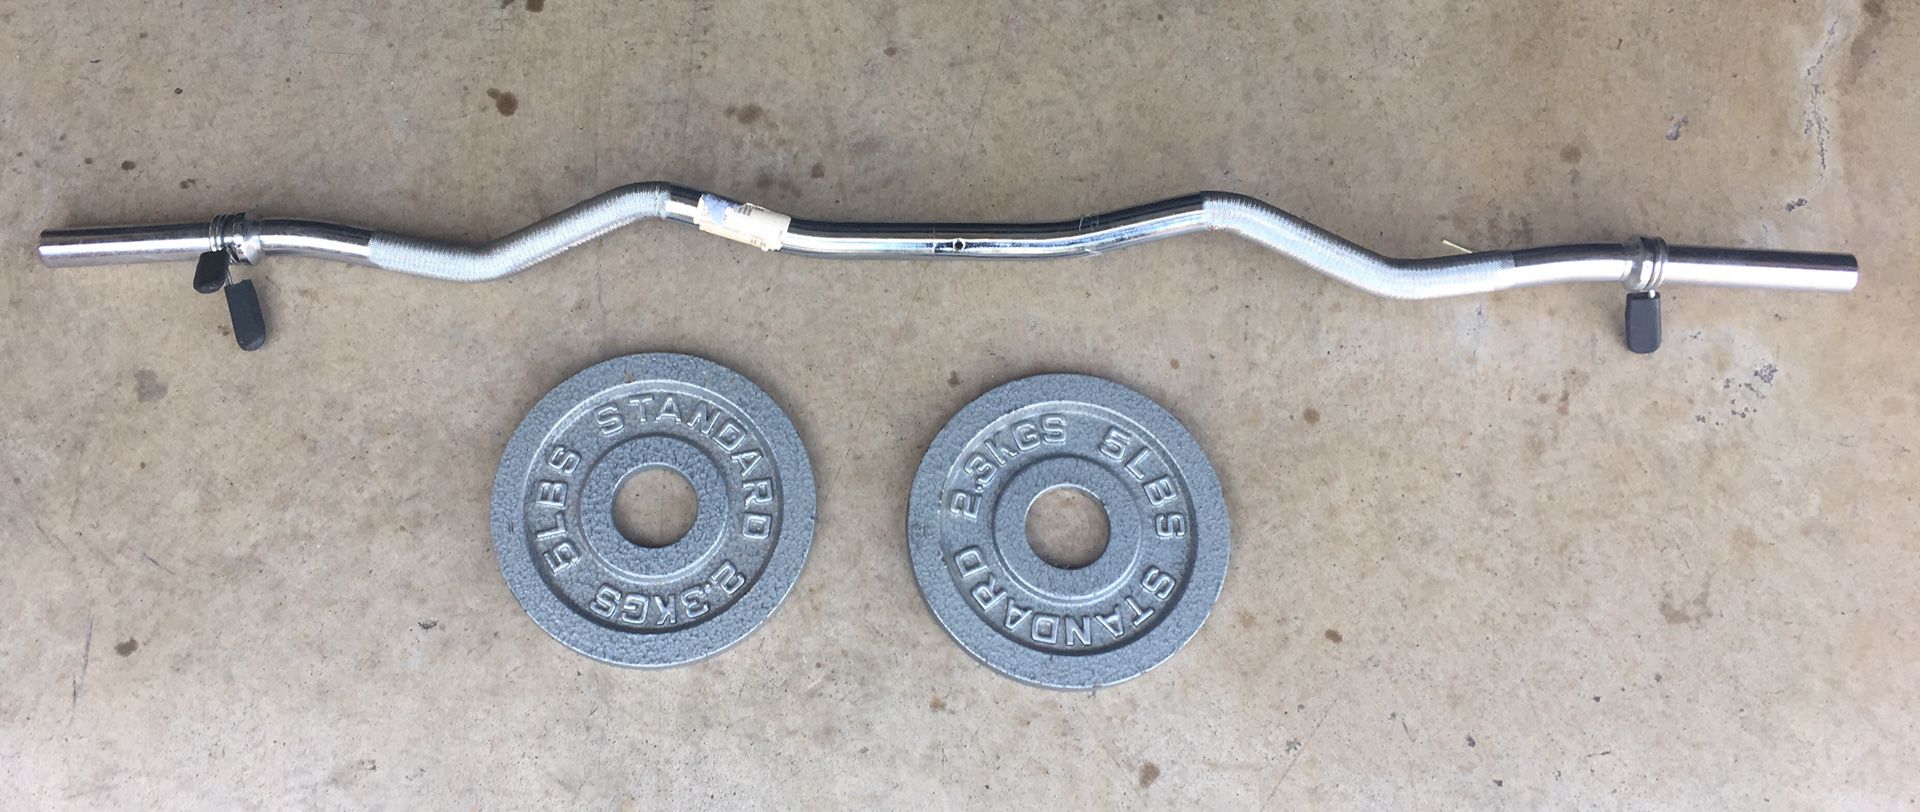 Curl bar and weights plates